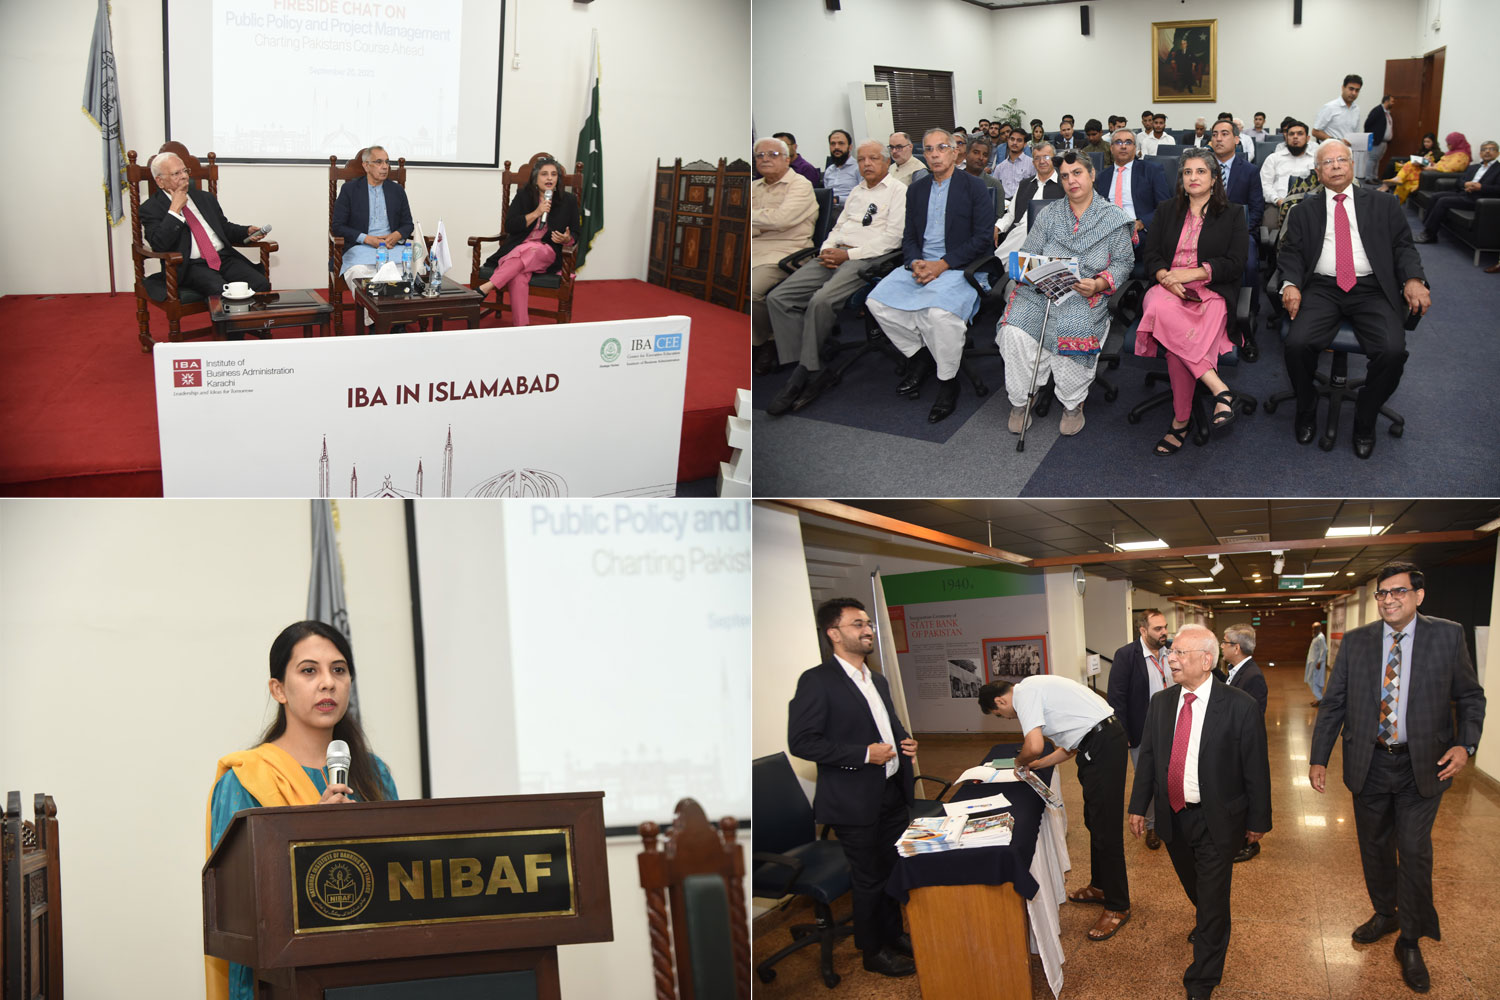 CEE at IBA in Islamabad Hosted a Fireside Chat on Postgraduate Diploma Programs